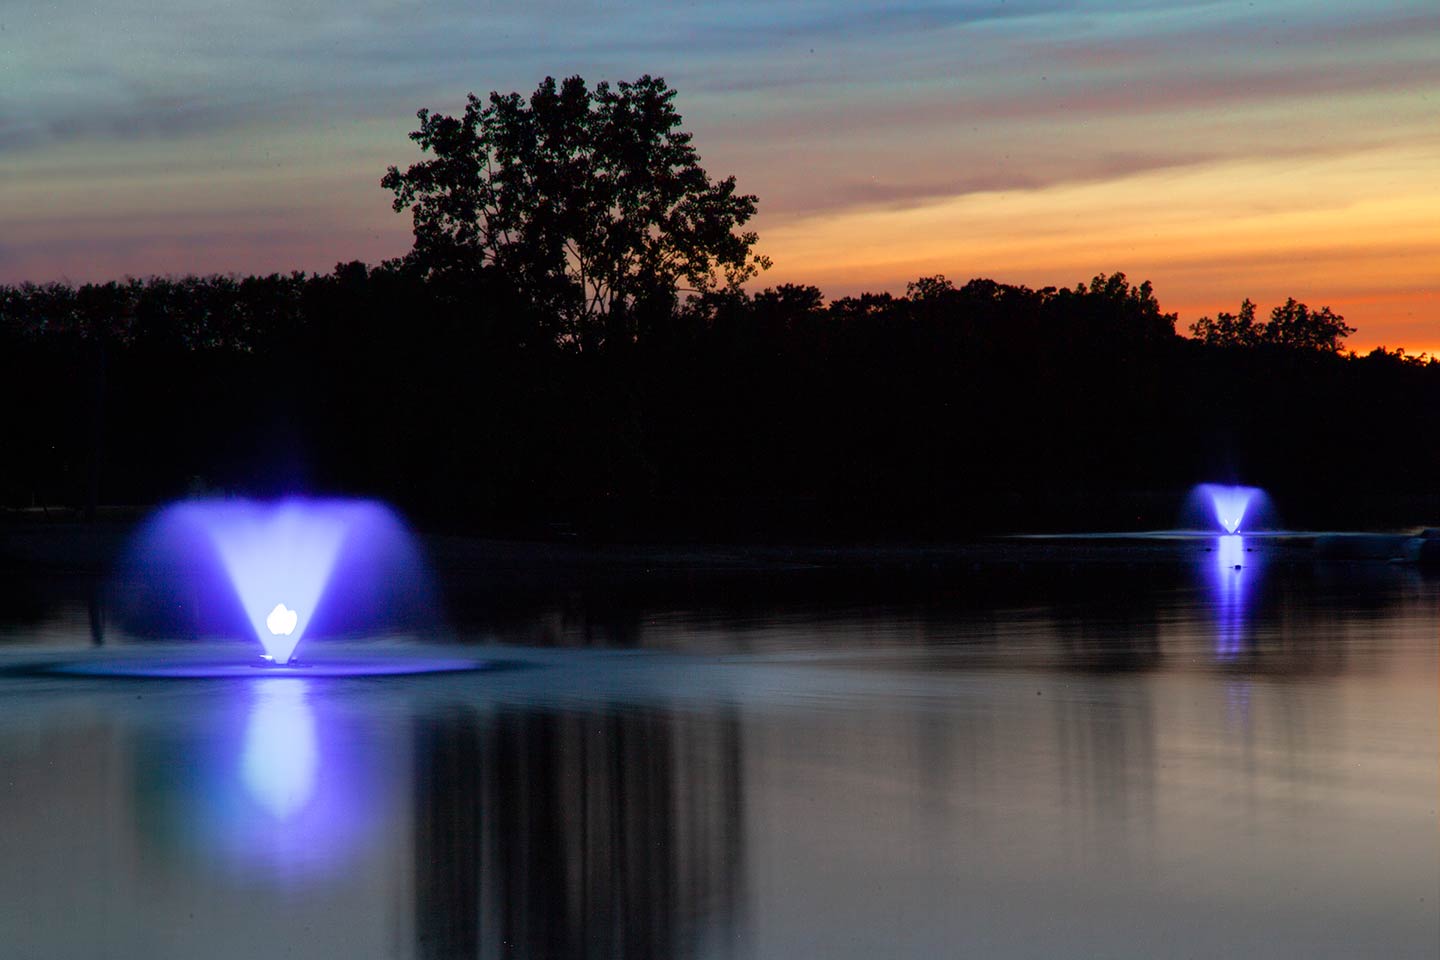 Scott Aerator Fountain Color Changing: 2 light RGB LED Set Scott Aerator Display Fountain Lighting Pond and Lake Floating Display Fountains By Scott Aerator 230v